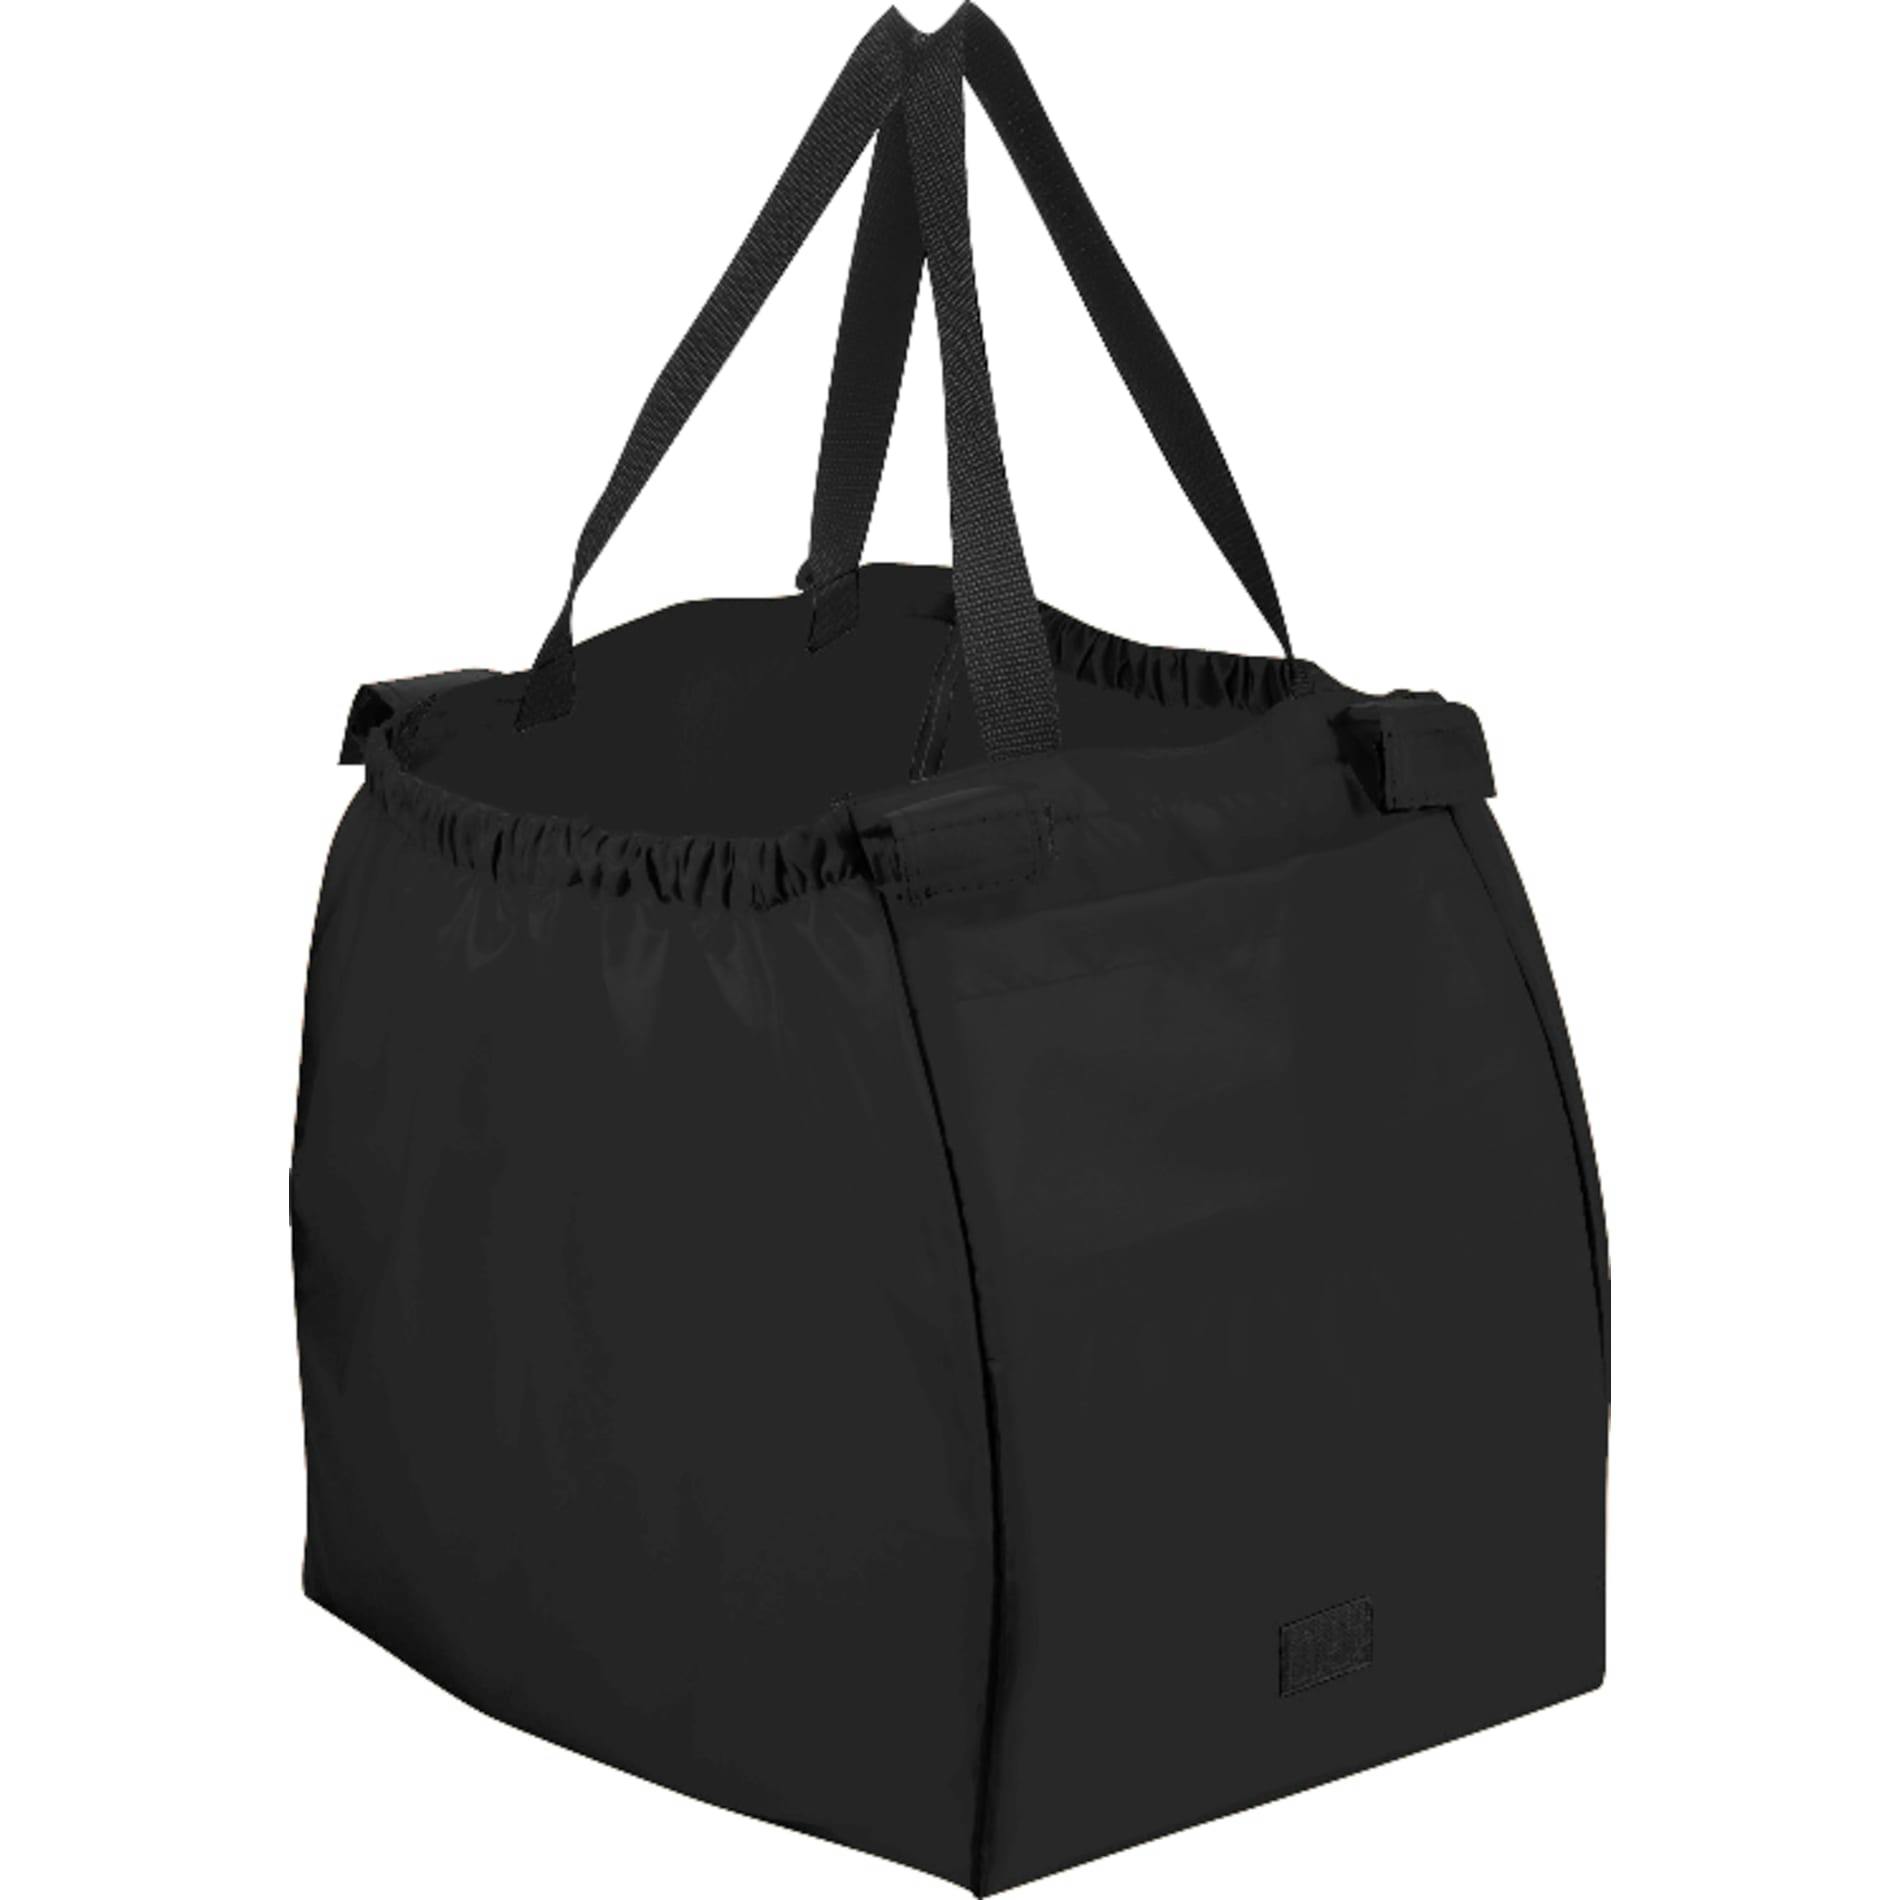 Over The Cart Grocery Tote - additional Image 7